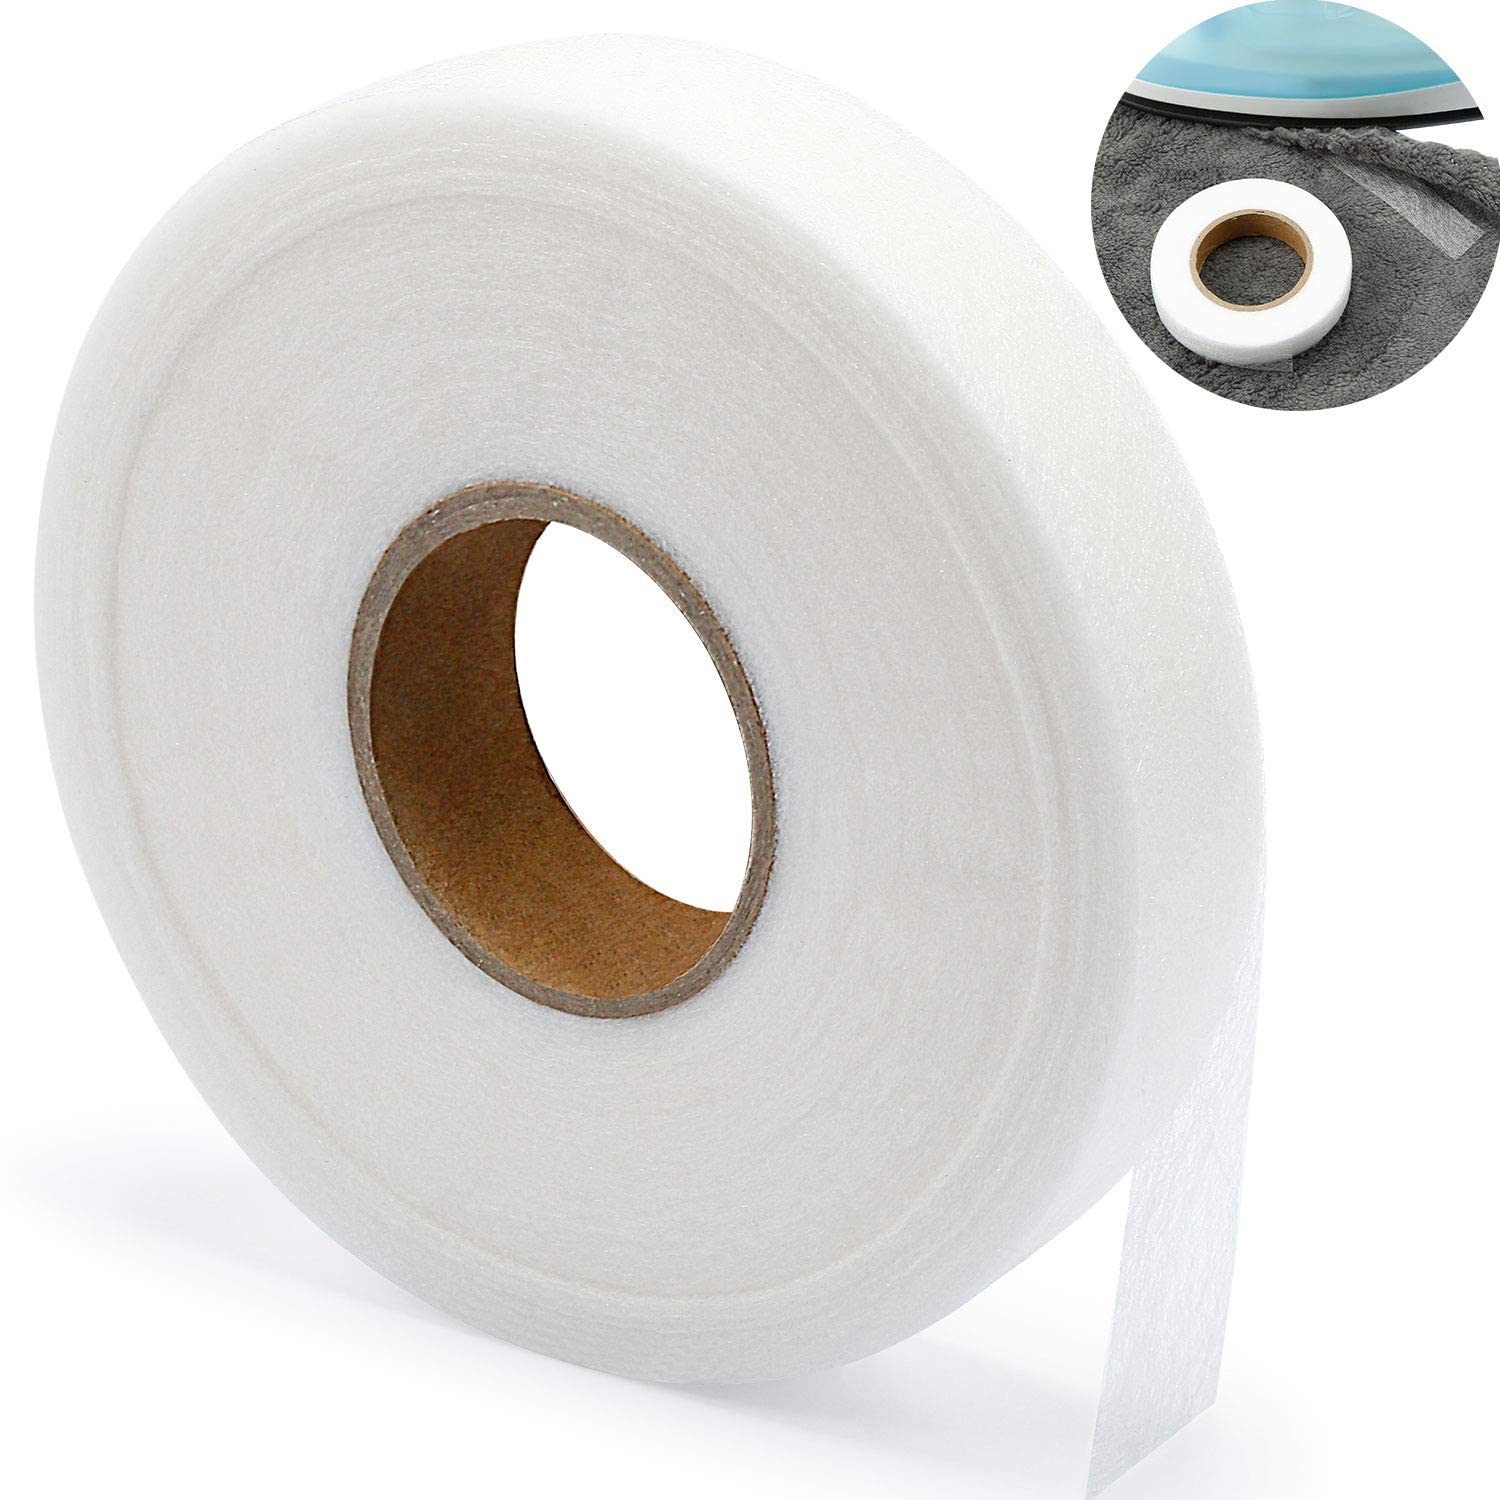 BOAO Iron-on Hemming Tape Fabric Fusing Tape Fusible Bonding Web Adhesive  Tape for Bonding clothes Jeans Pants collars, 100 Yards (38